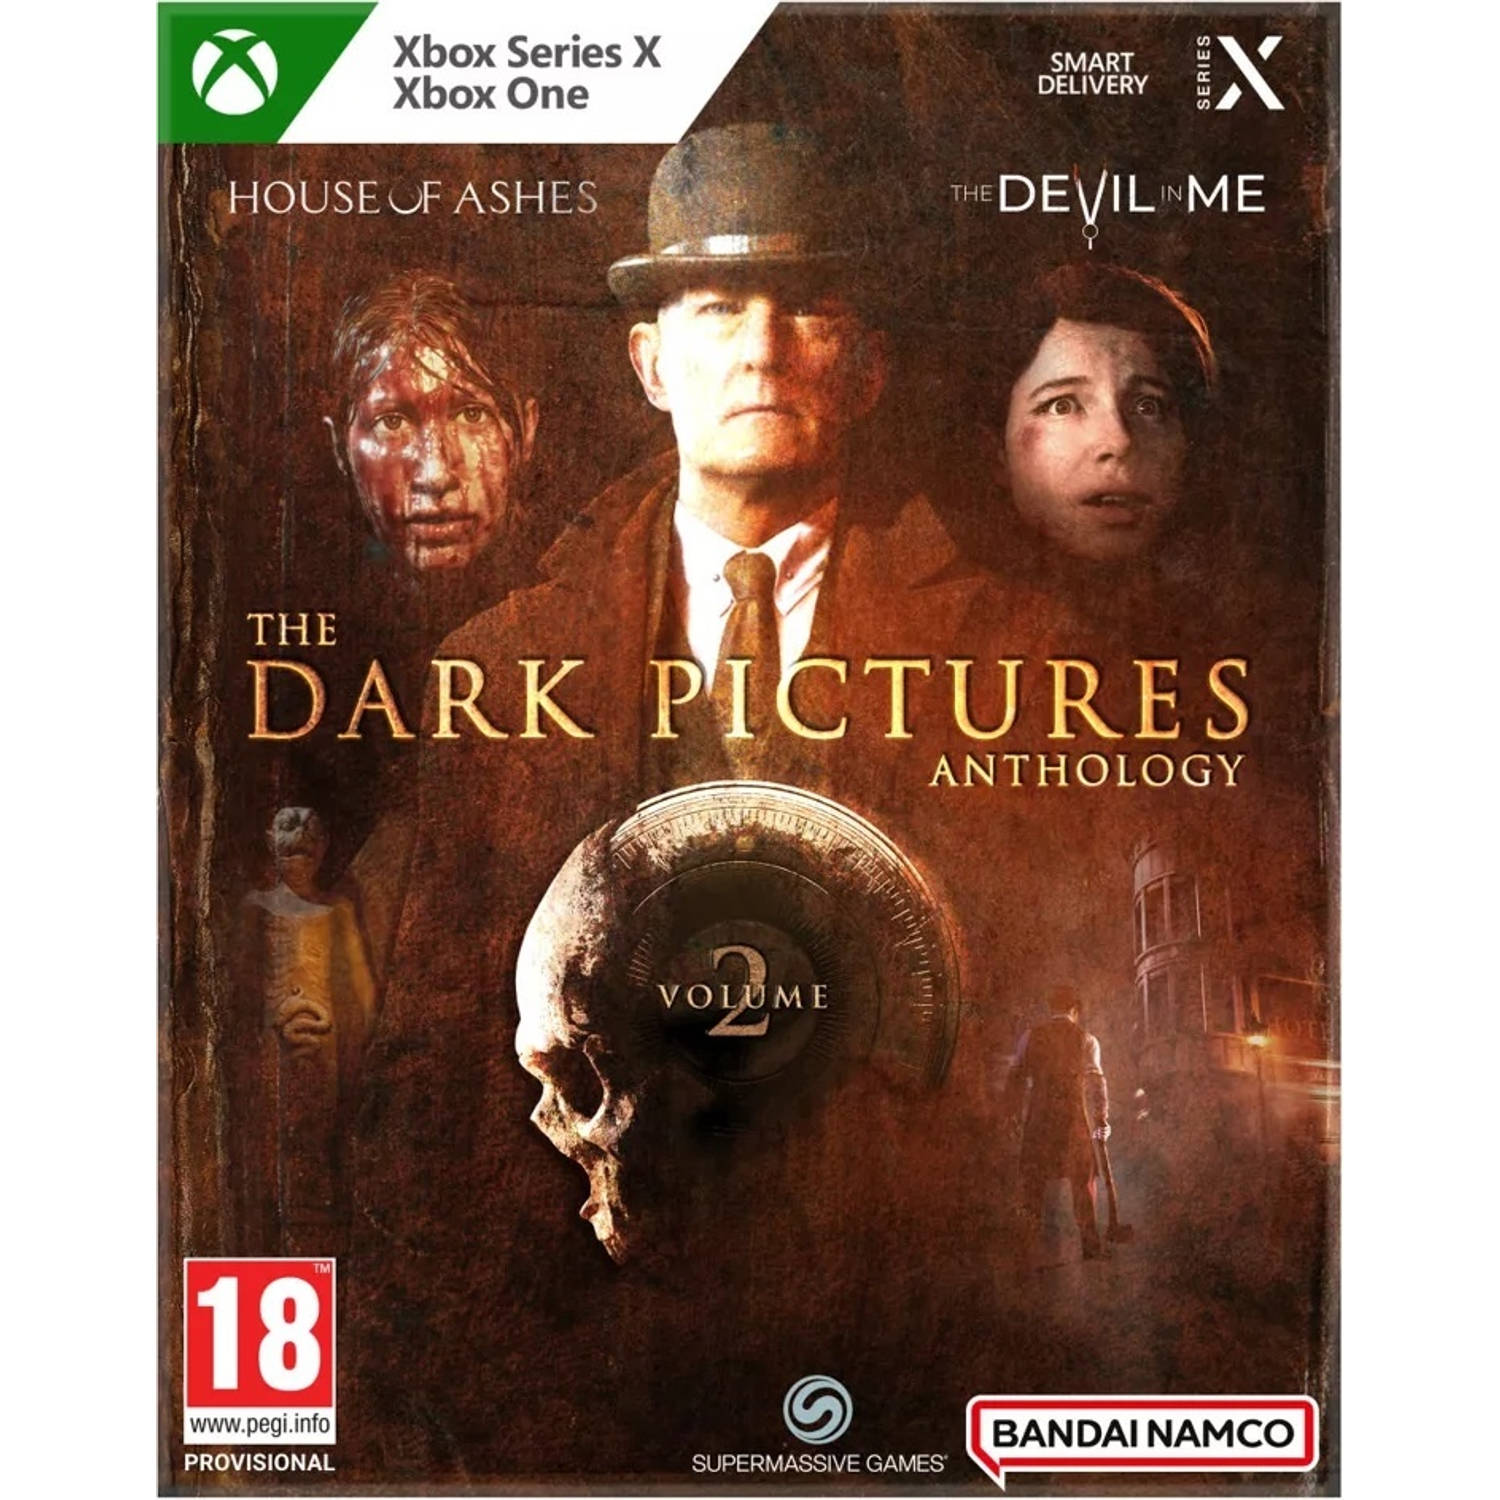 The Dark Pictures Volume 2 (House of Ashes + The Devil in Me) Xbox One & Series X